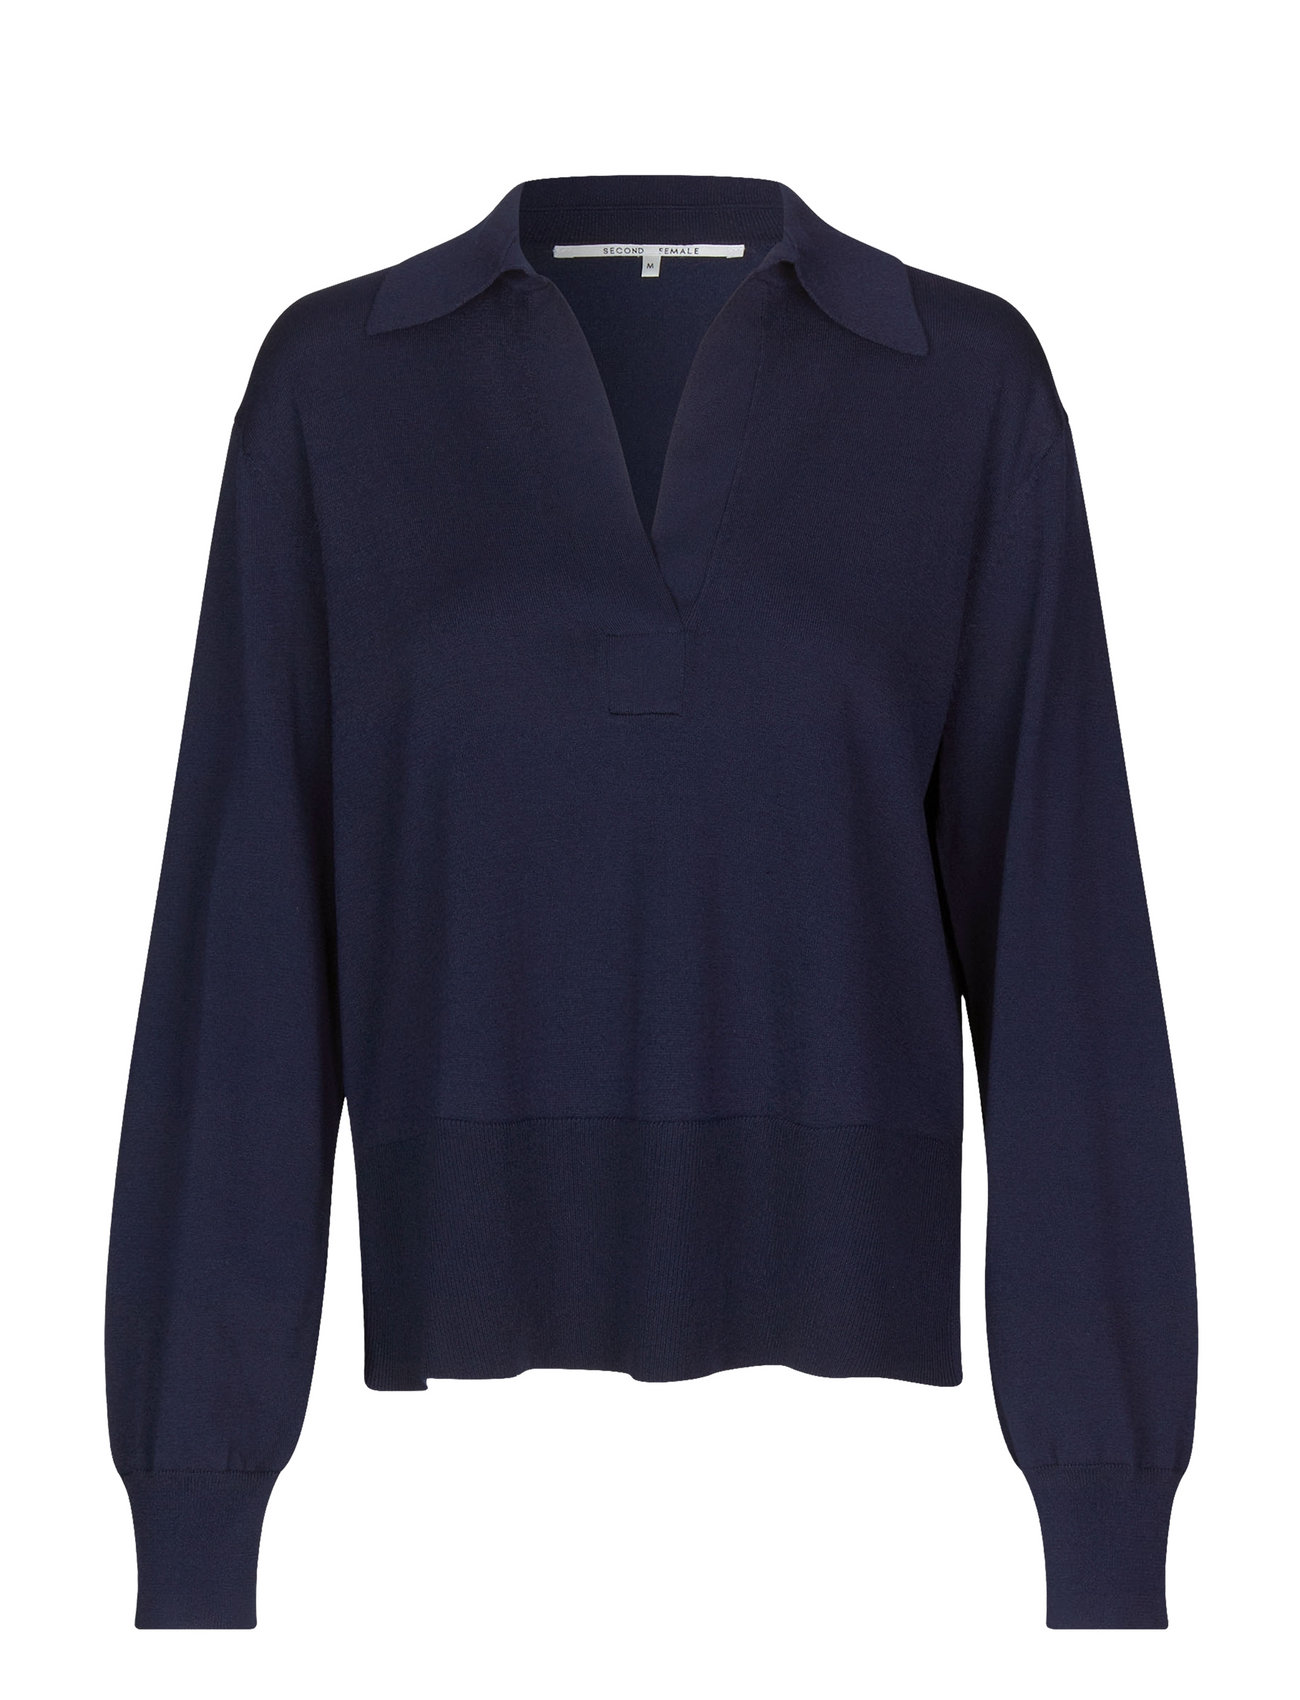 Siva Knit Collar Tops Knitwear Jumpers Navy Second Female